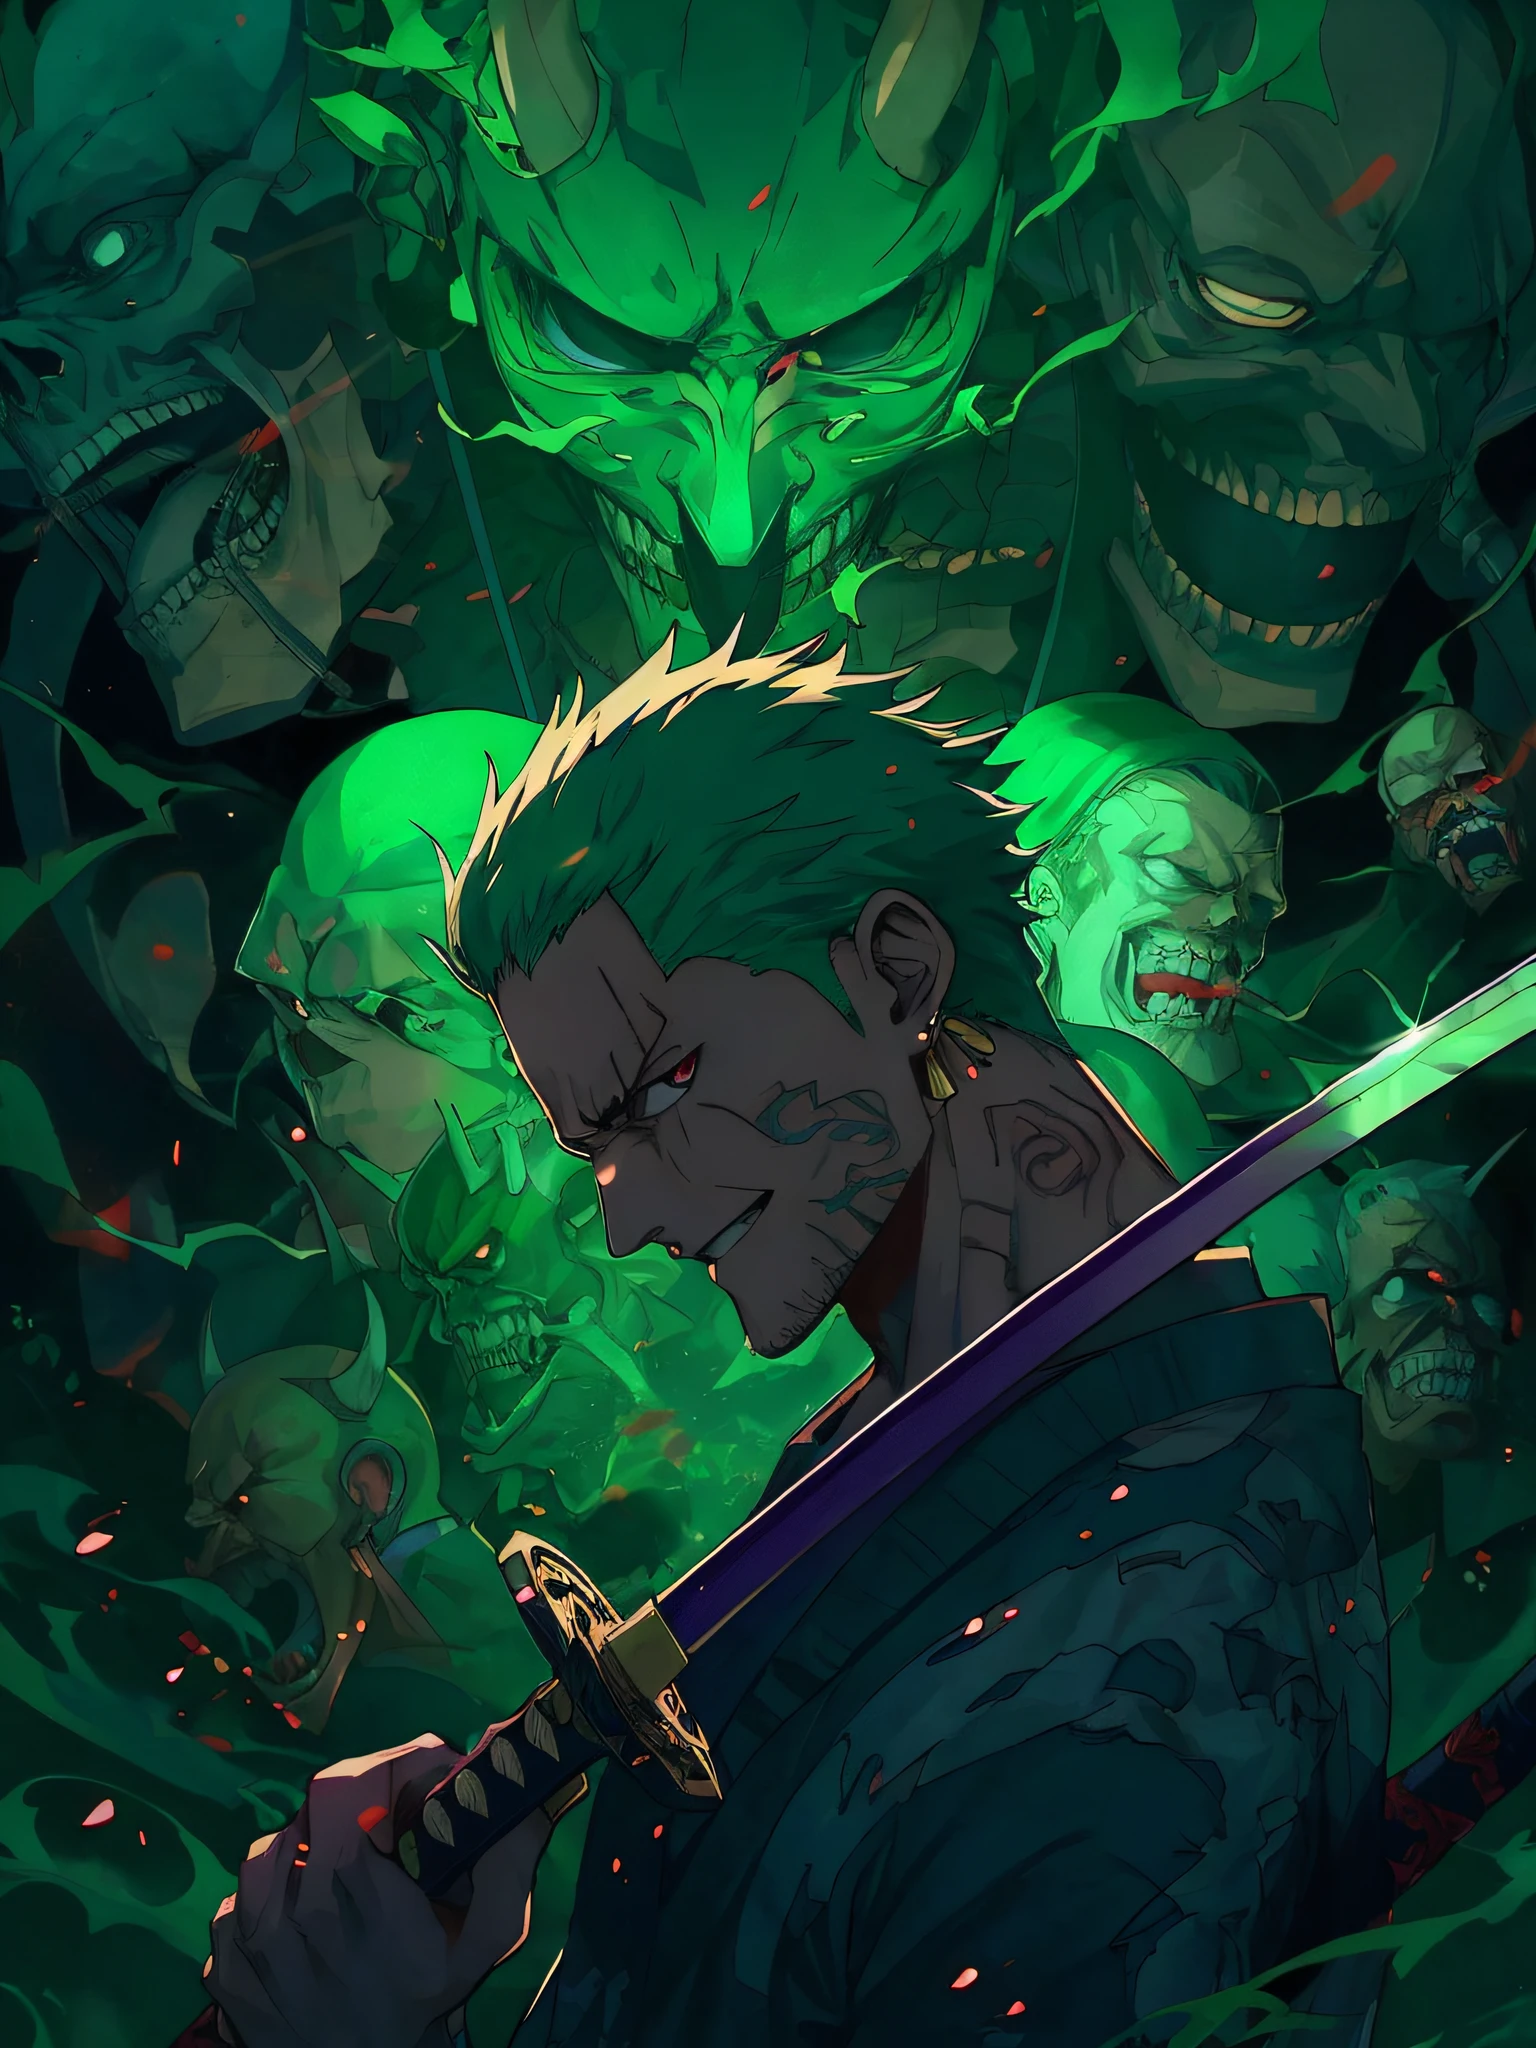 anime character with green hair holding a sword surrounded by skulls, roronoa zoro, badass anime 8 k, anime epic artwork, demon slayer artstyle, anime art wallpaper 4k, anime art wallpaper 4 k, 4k anime wallpaper, anime wallpaper 4 k, anime wallpaper 4k, anime art wallpaper 8 k, 4 k manga wallpaper, anime wallaper